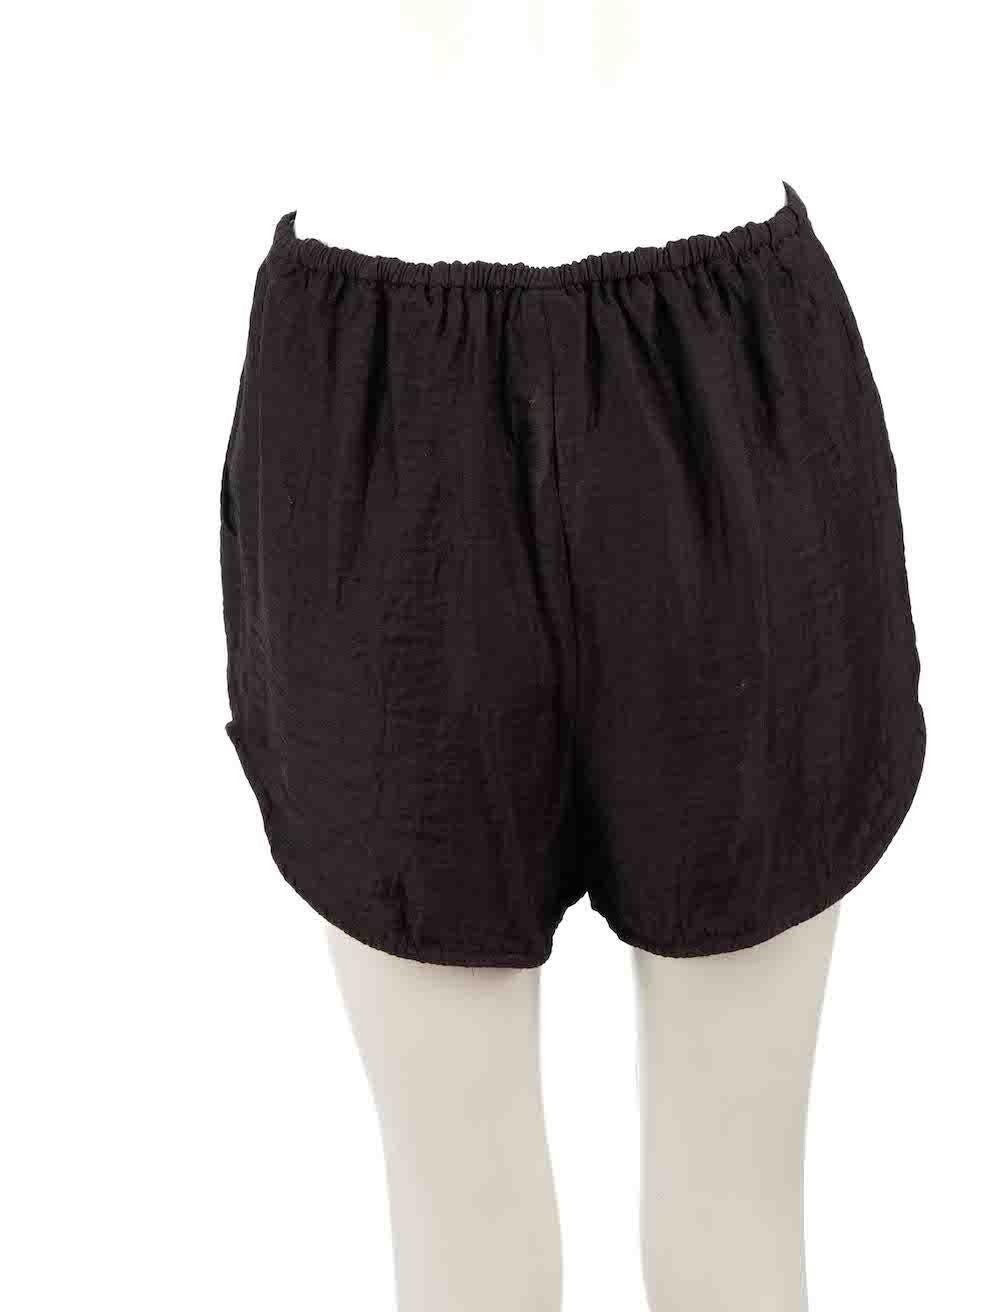 Zimmermann Black Elasticated Shorts Size S In Excellent Condition For Sale In London, GB